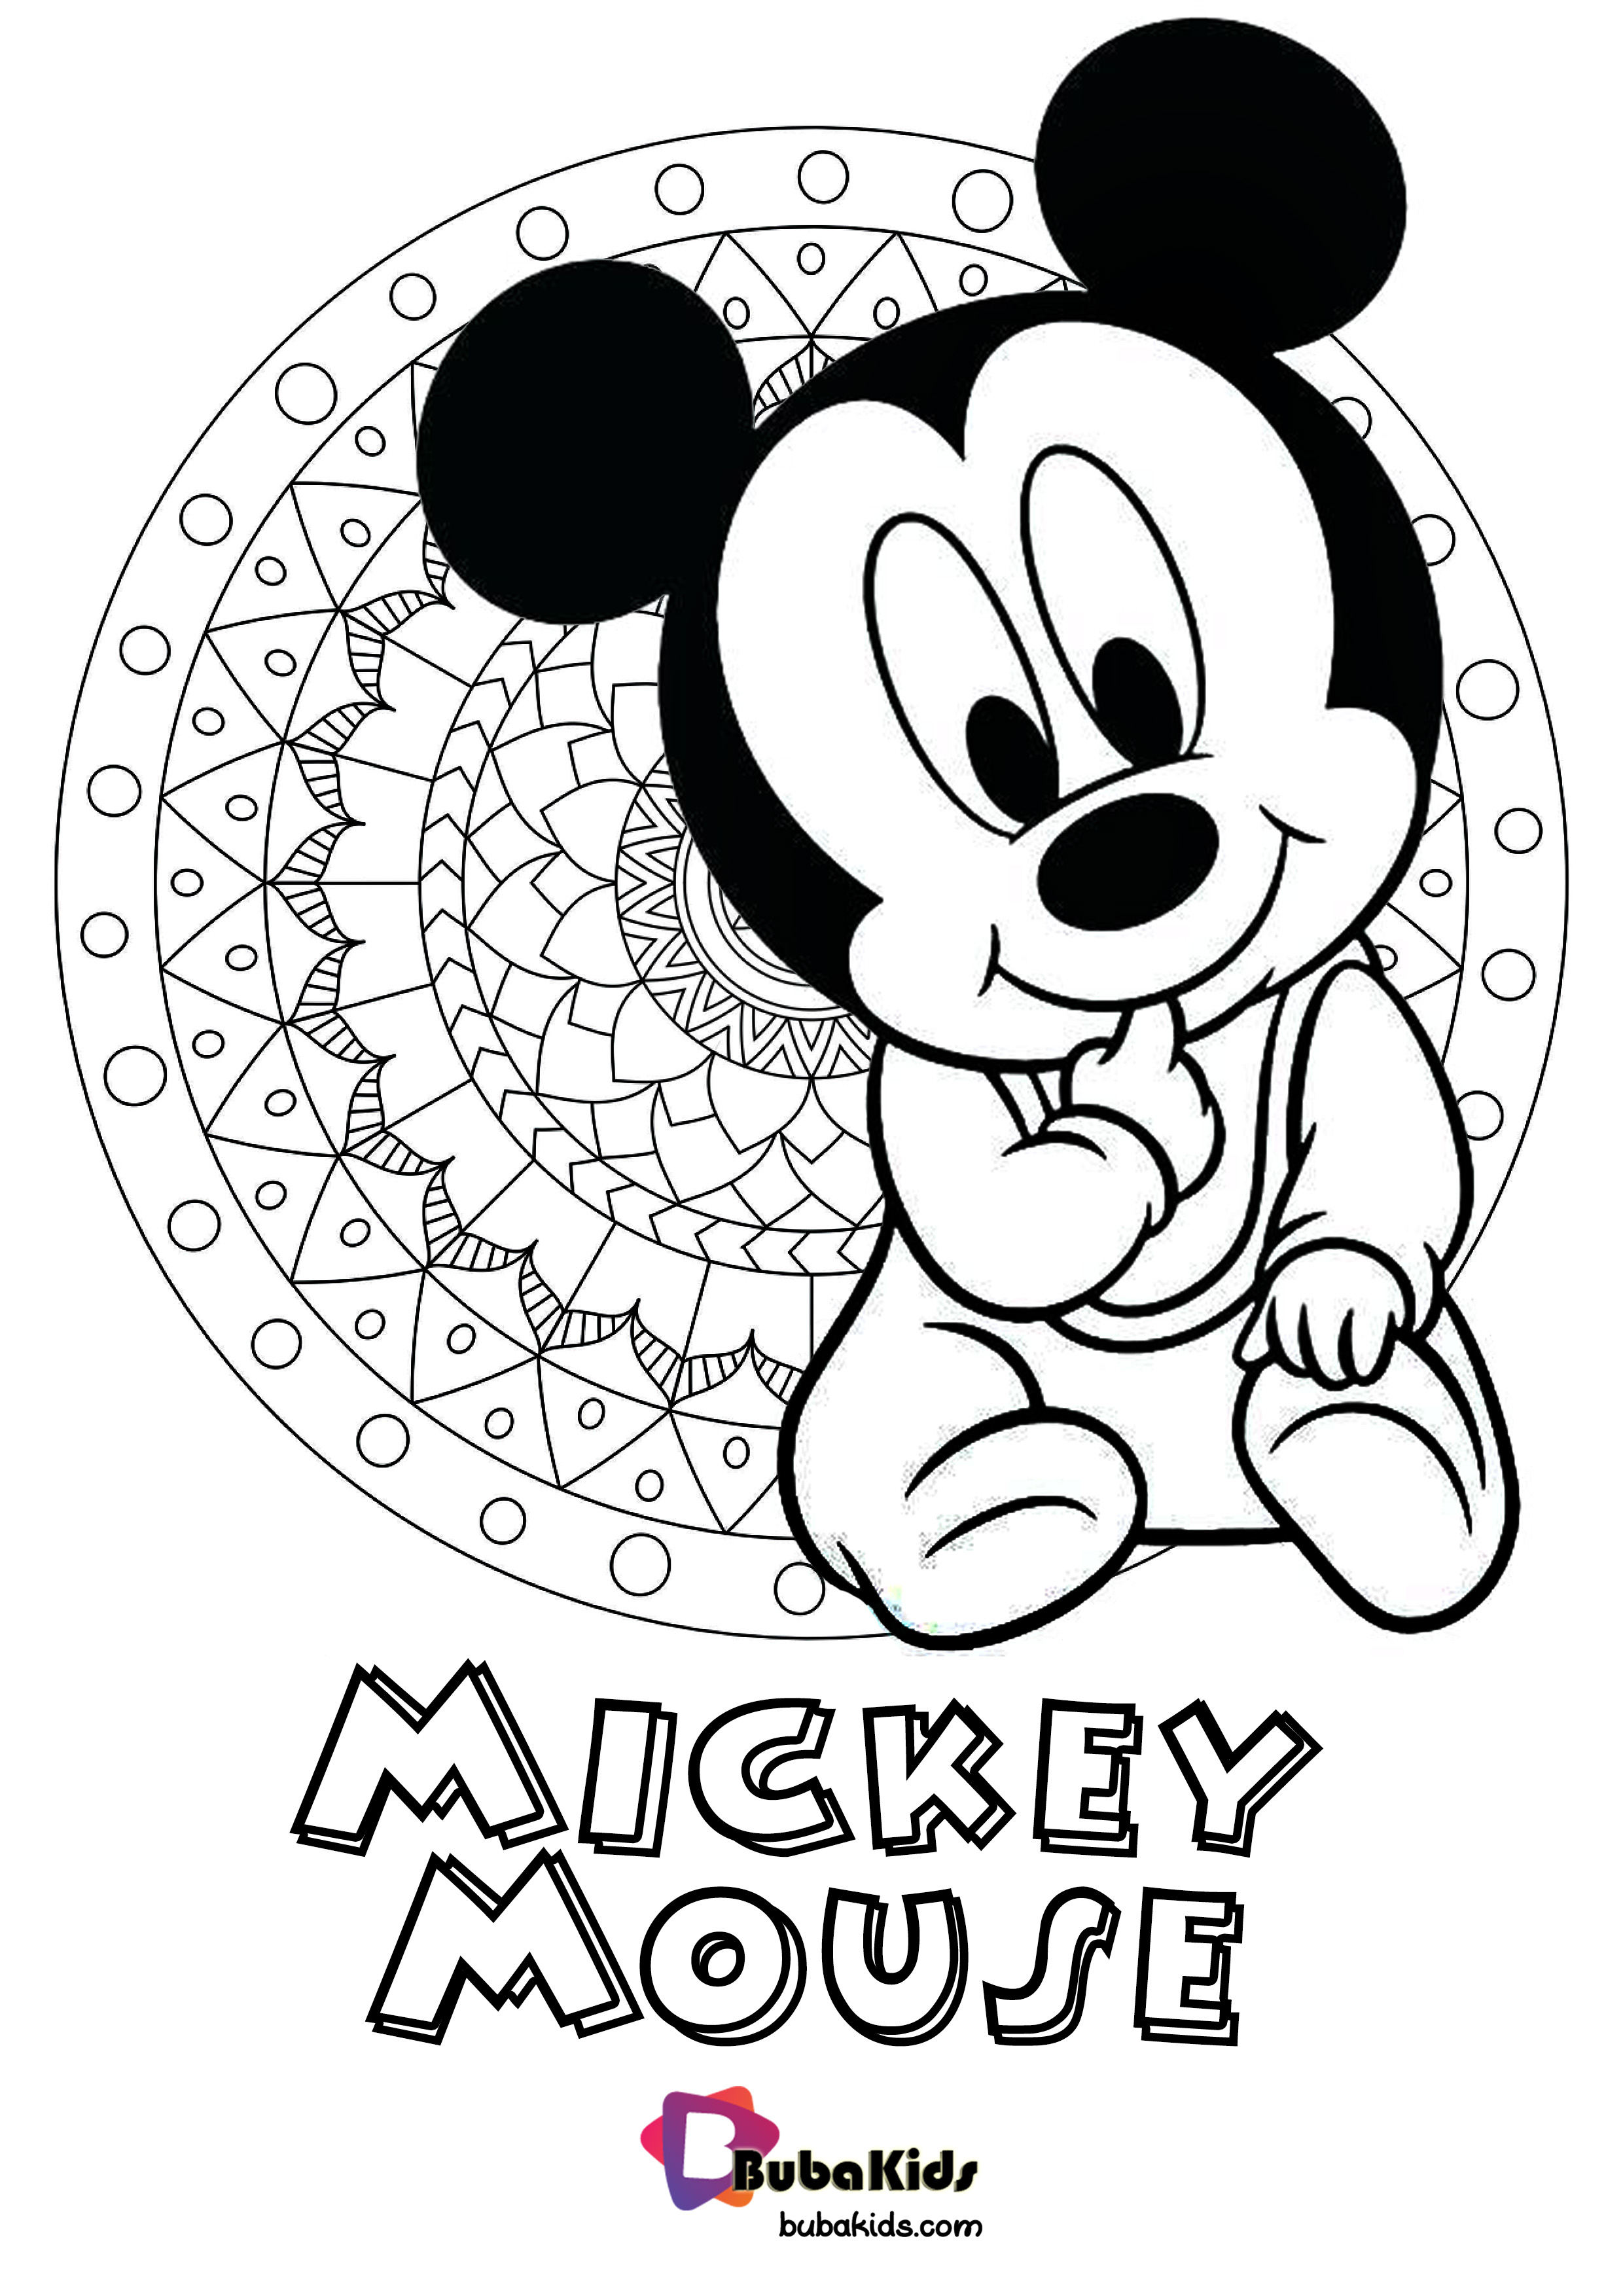 Cute Baby Mickey Mouse Coloring Pages Printable Free   BubaKids.com